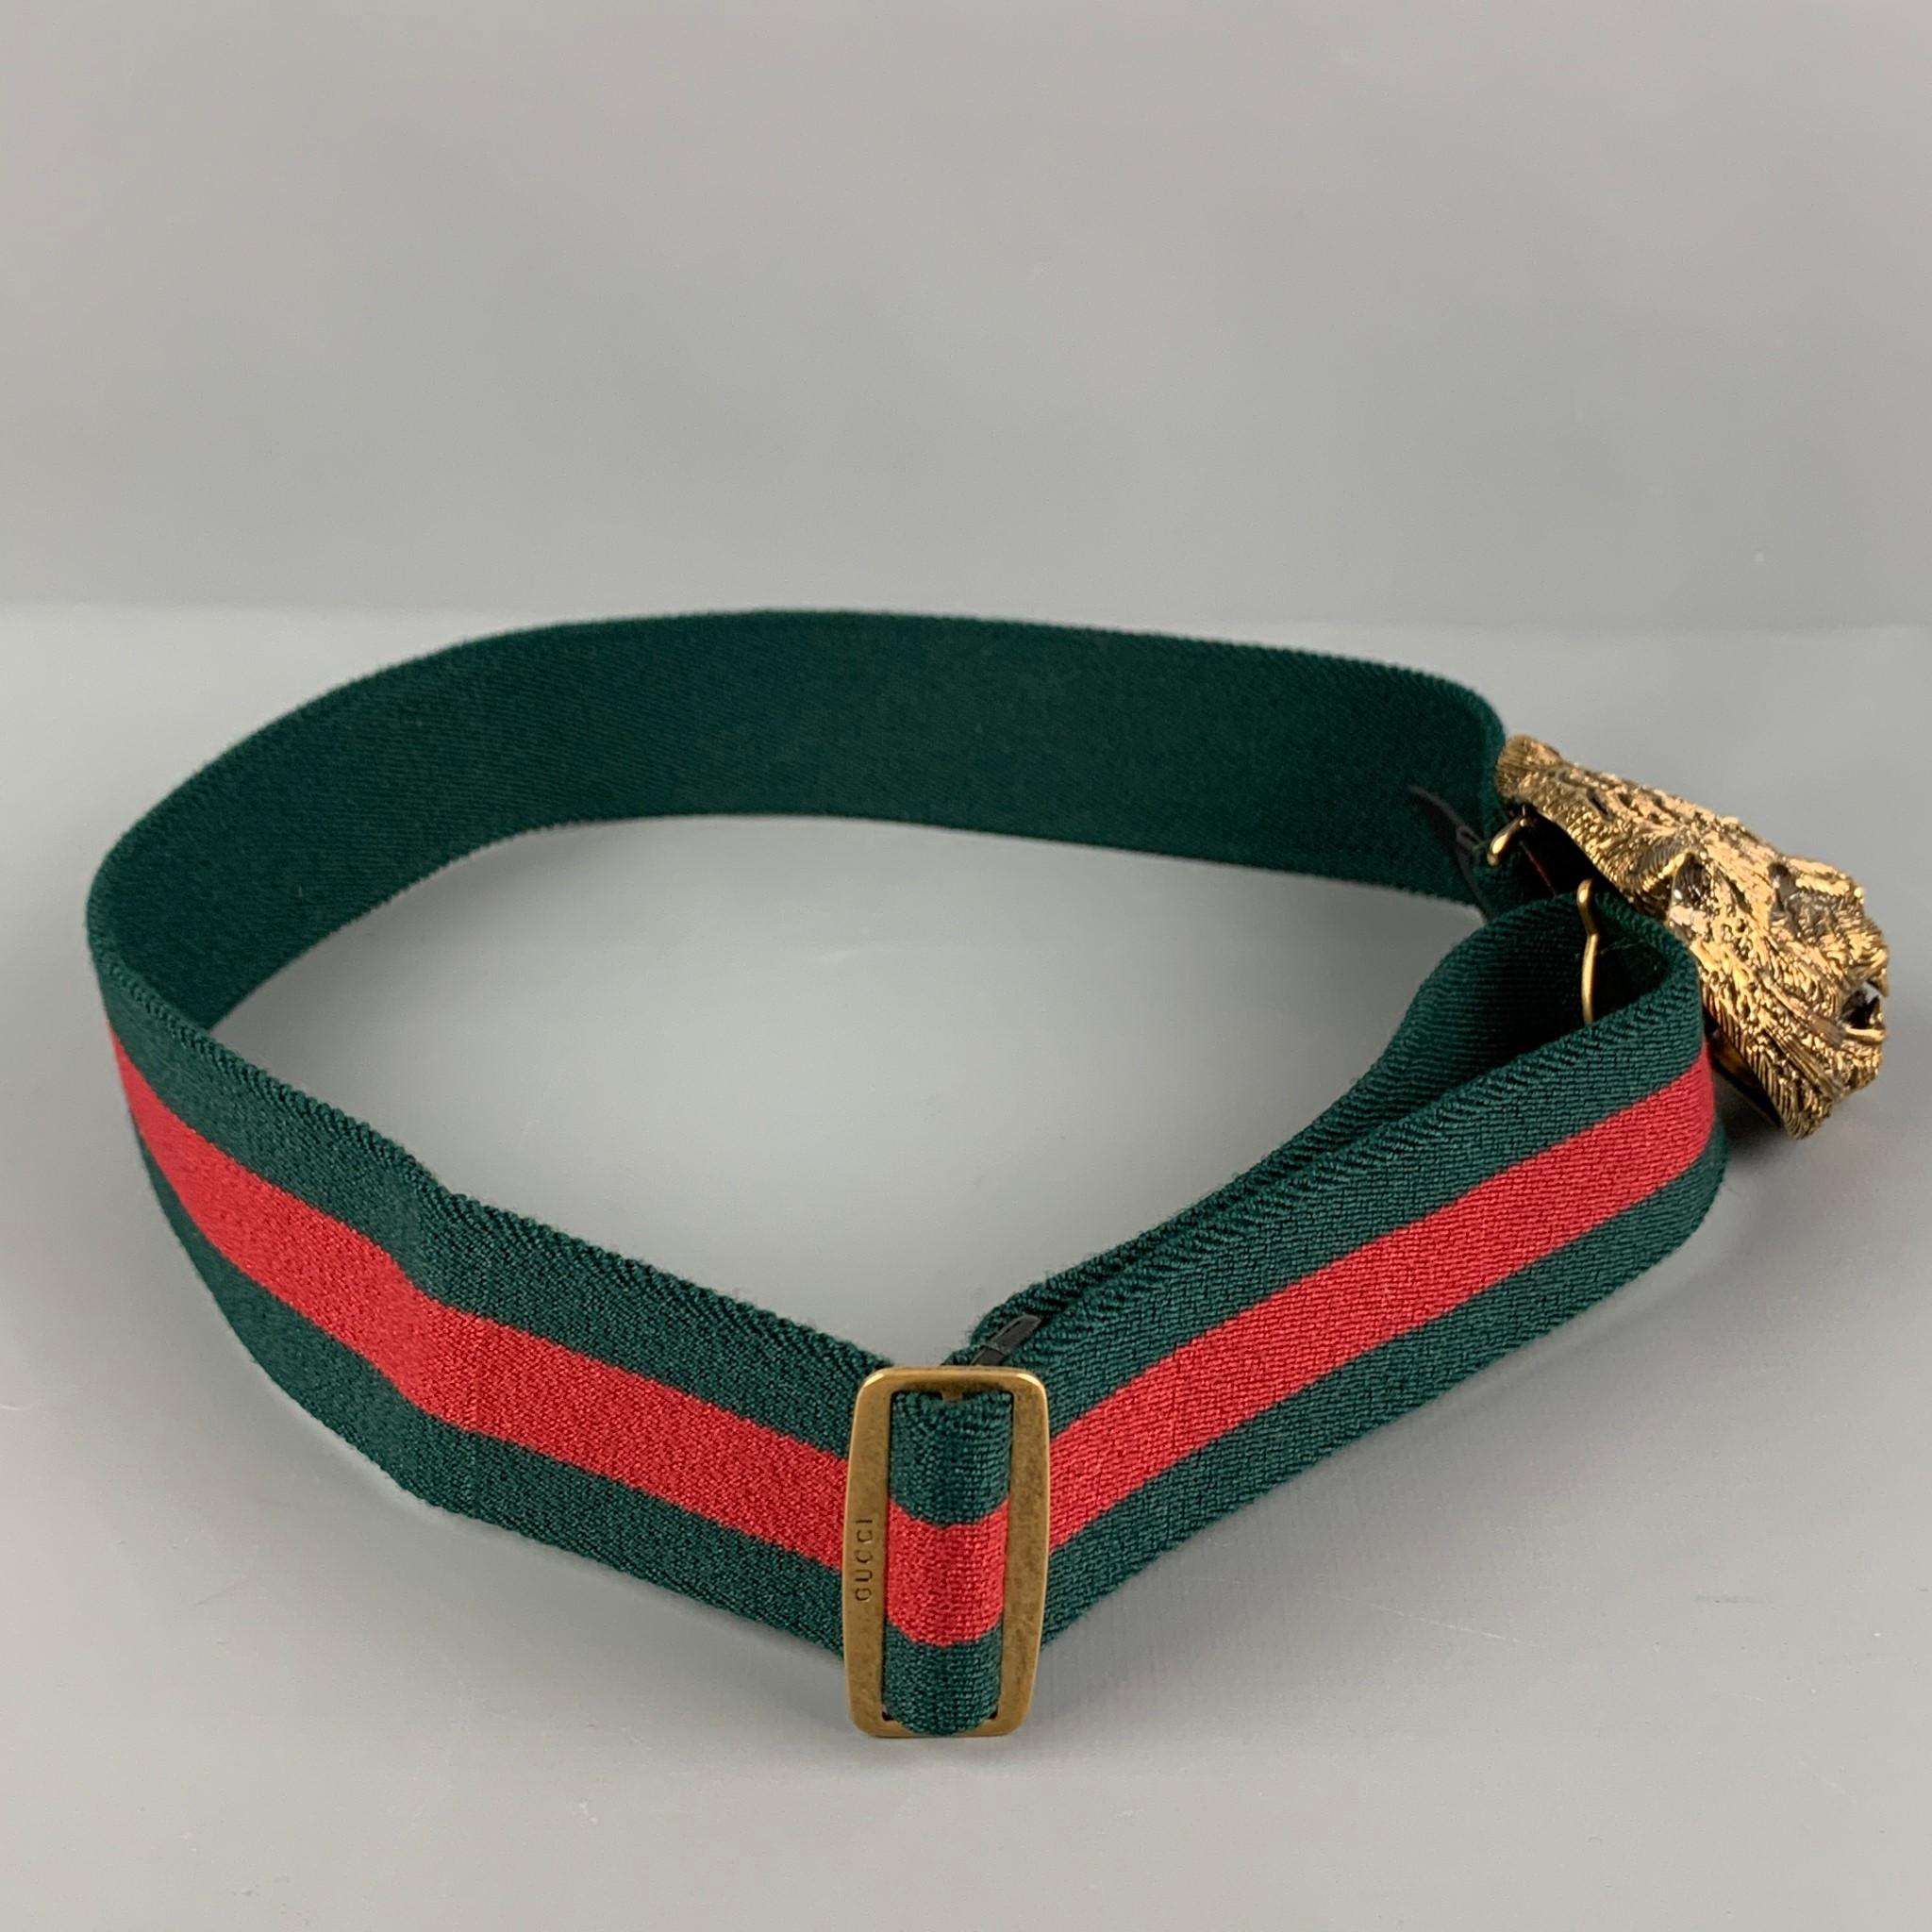 GUCCI belt comes in a green & red stripe fabric featuring a brass feline head buckle with a hook & loop closure. Made in Italy.

Very Good Pre-Owned Condition.
Marked: 446944 HGW1T / 75-30

Length: 27 in.
Width: 1.5 in.
Buckle: 3 in. 